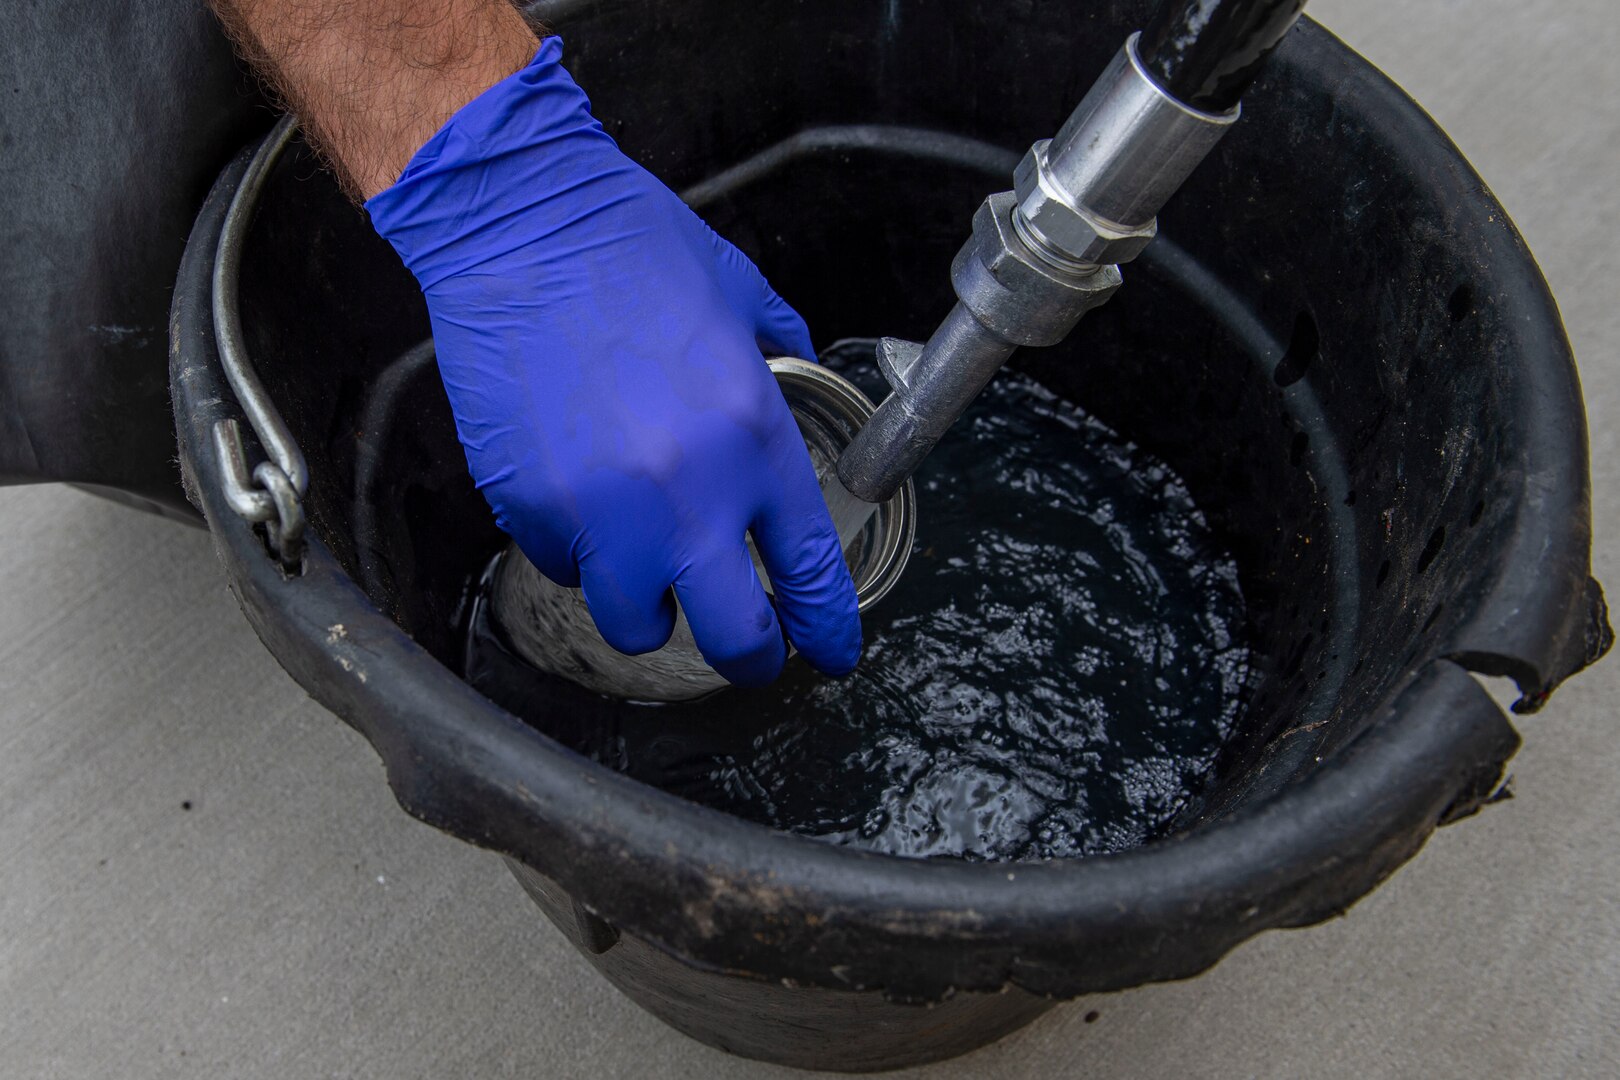 Senior Airman Gavin Rees, 23d Logistics Readiness Squadron (LRS) fuels facilities technician, drains tank sumps Oct. 30, 2019, at Moody Air Force Base, Ga. The 23d LRS fuels facilities is responsible for maintaining facilities, product purity, storage and accountability. Fuels facilities Airmen maintain the base service station by performing routine checks on the operating valves, fuel tanks and service station parts. (U.S. Air Force photo by Airman Azaria E. Foster)